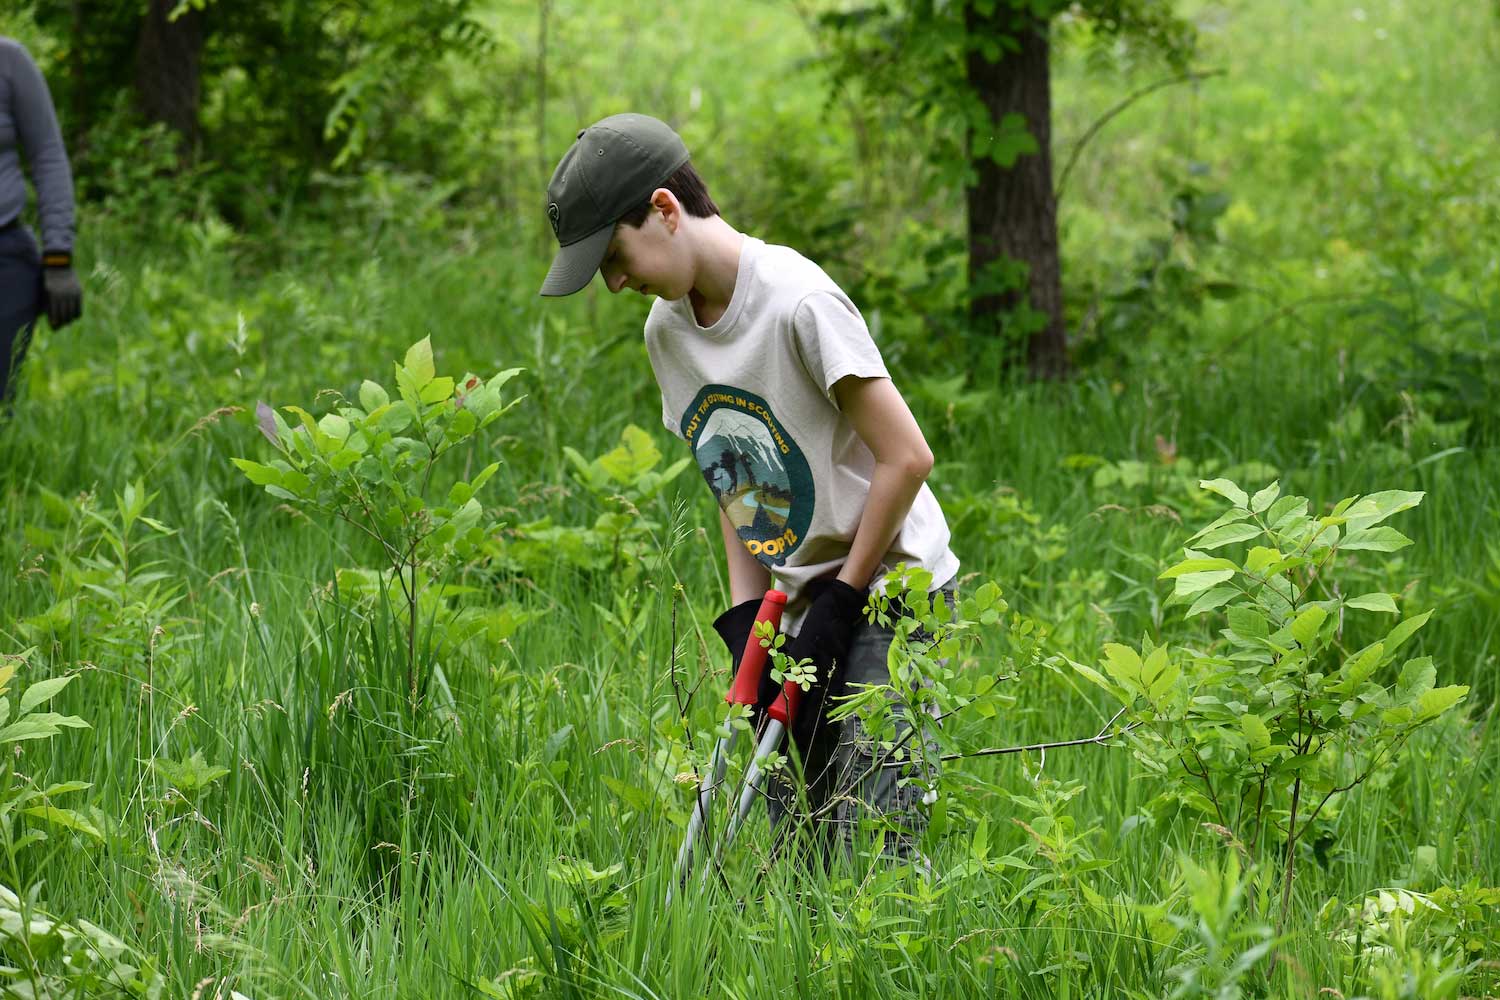 A person working with loppers in a grassy area.